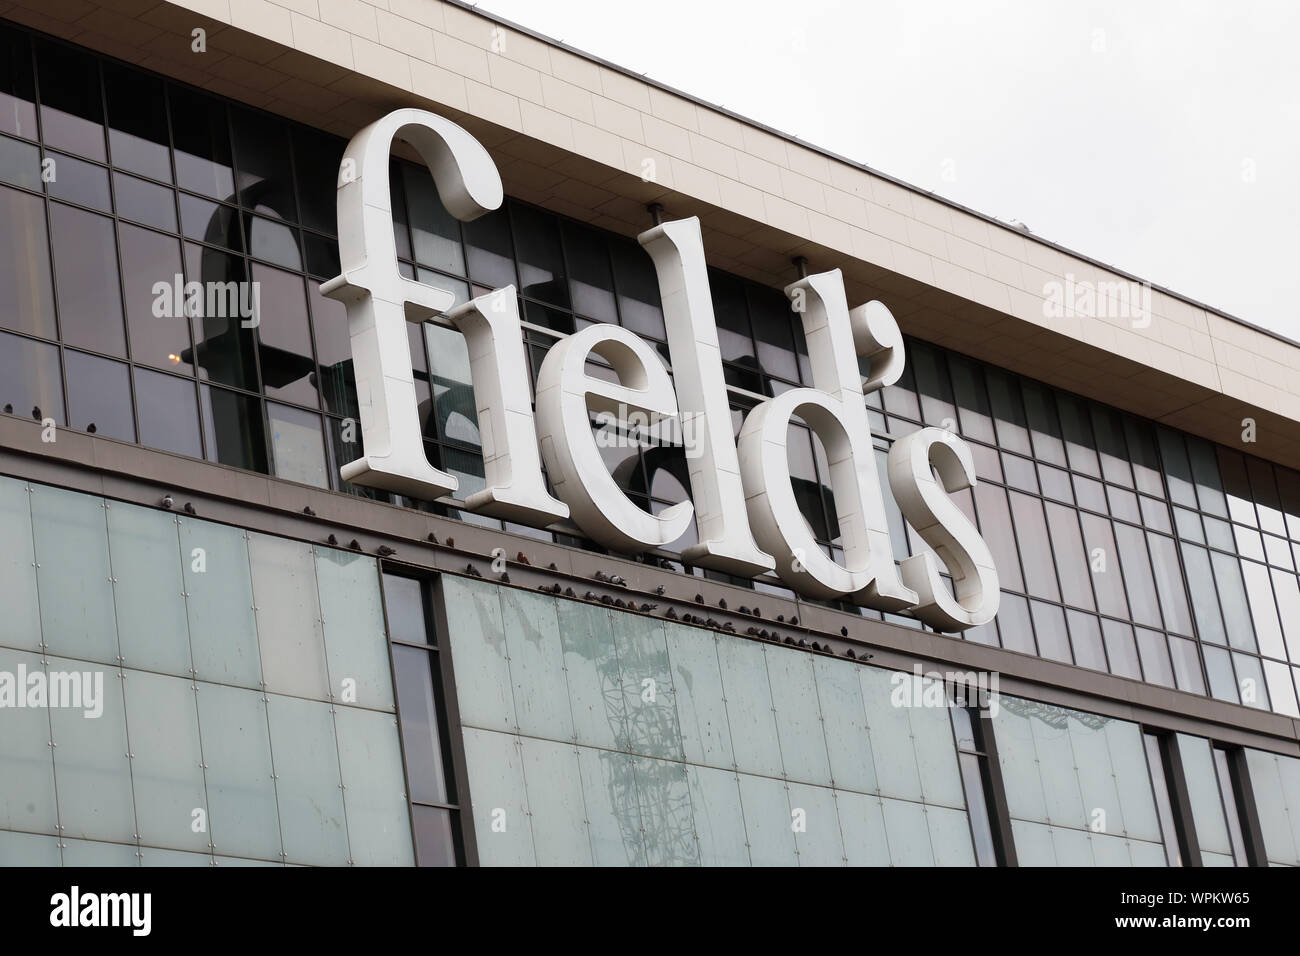 Copenhagen, Denmark - September 4, 2019: Exterior detail of the Fields shopping mall located in the Orestad district. Stock Photo